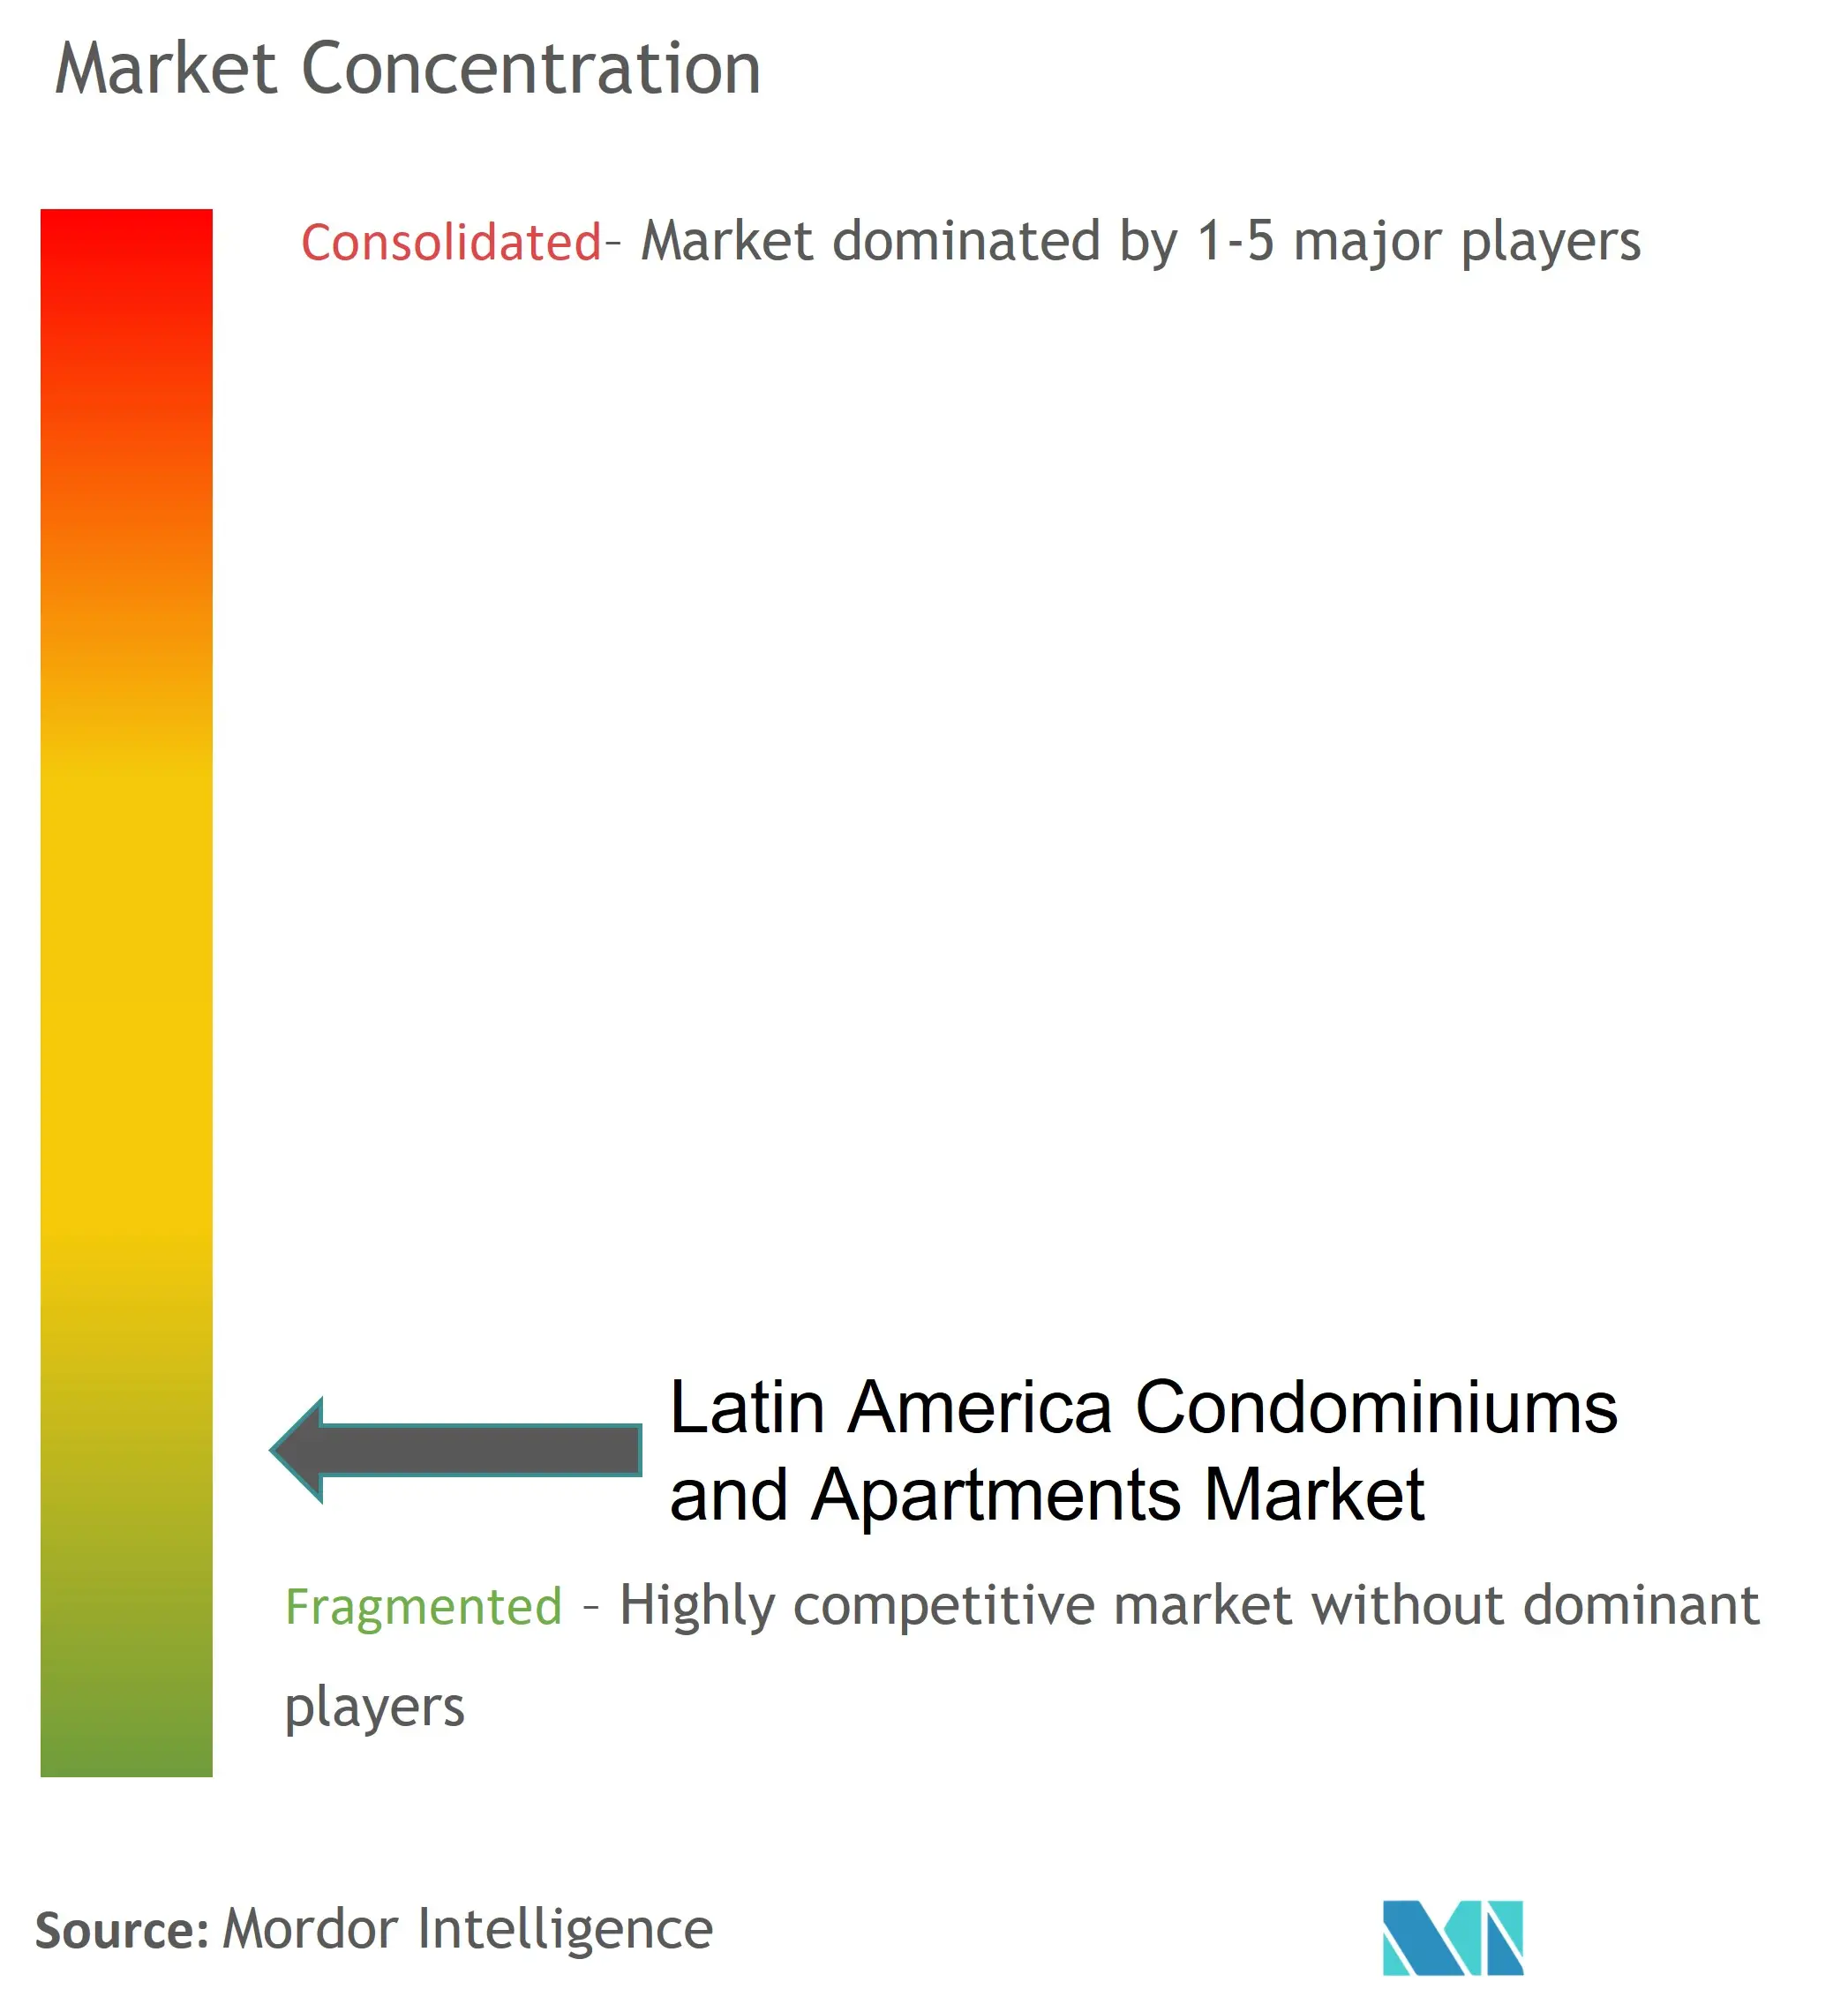 Latin America Condominiums and Apartments Market Concentration